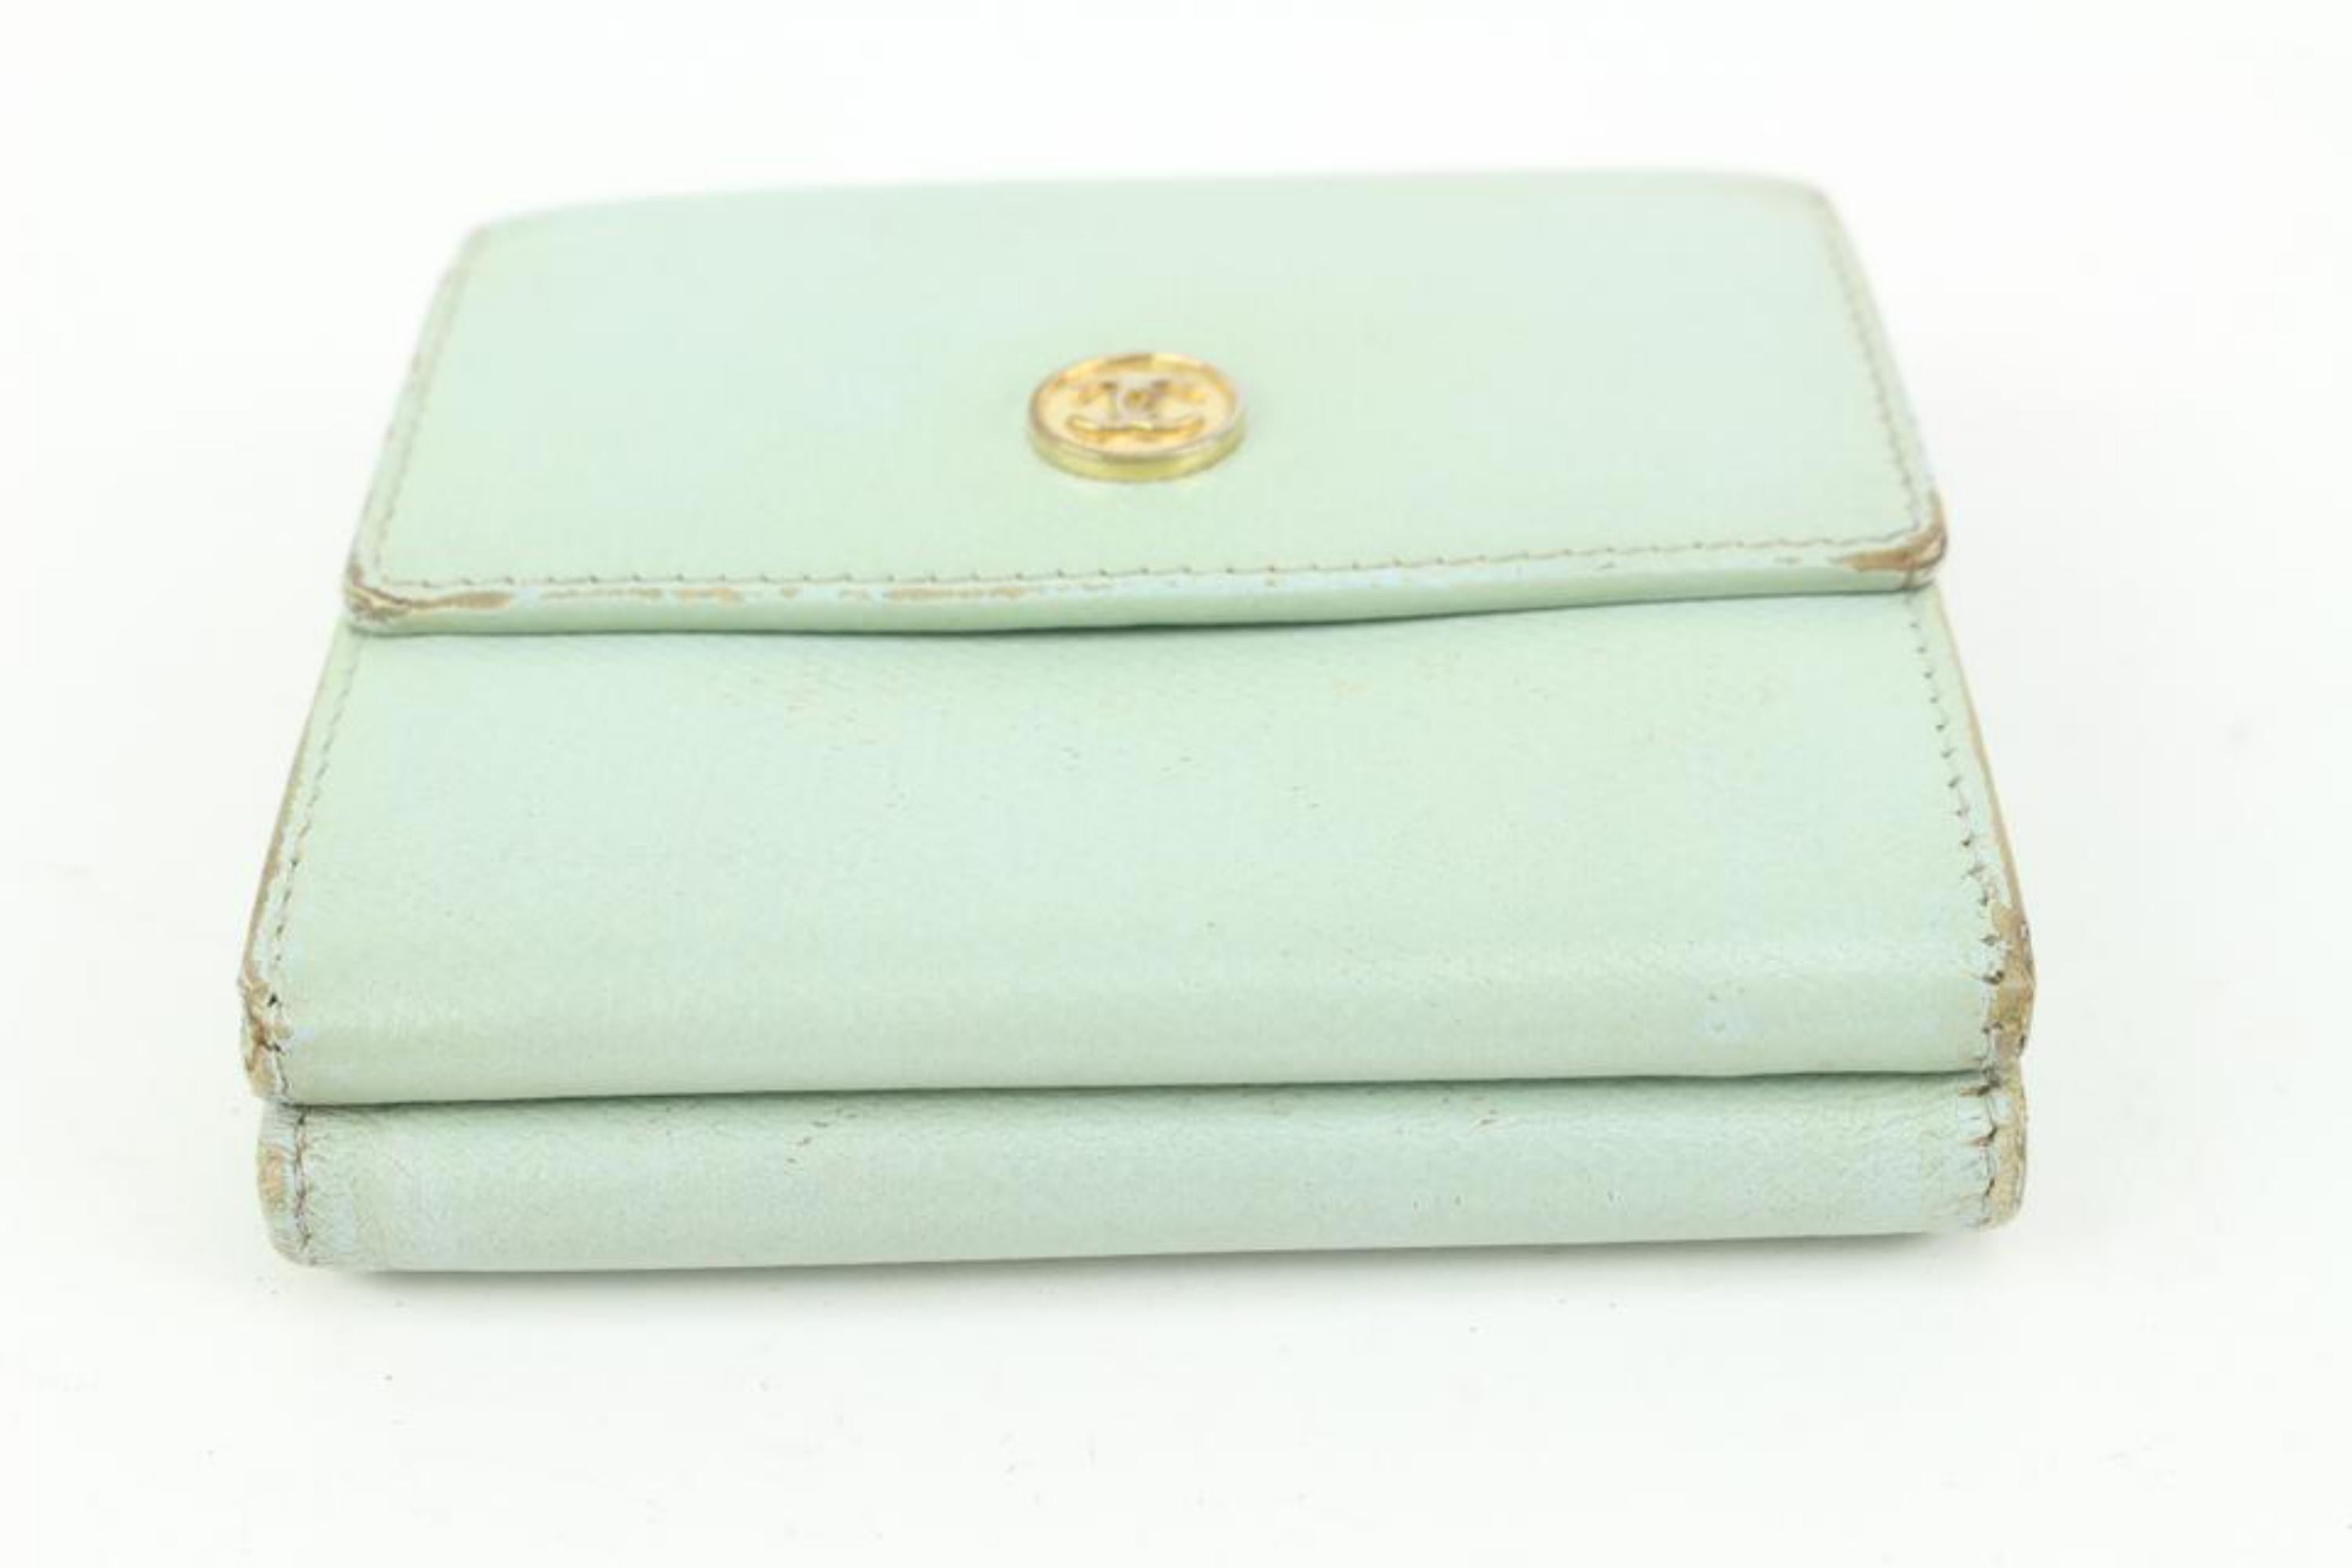 Chanel Seafoam Green Calfskin Button Line Compact Trifold Wallet 54ck325s For Sale 3